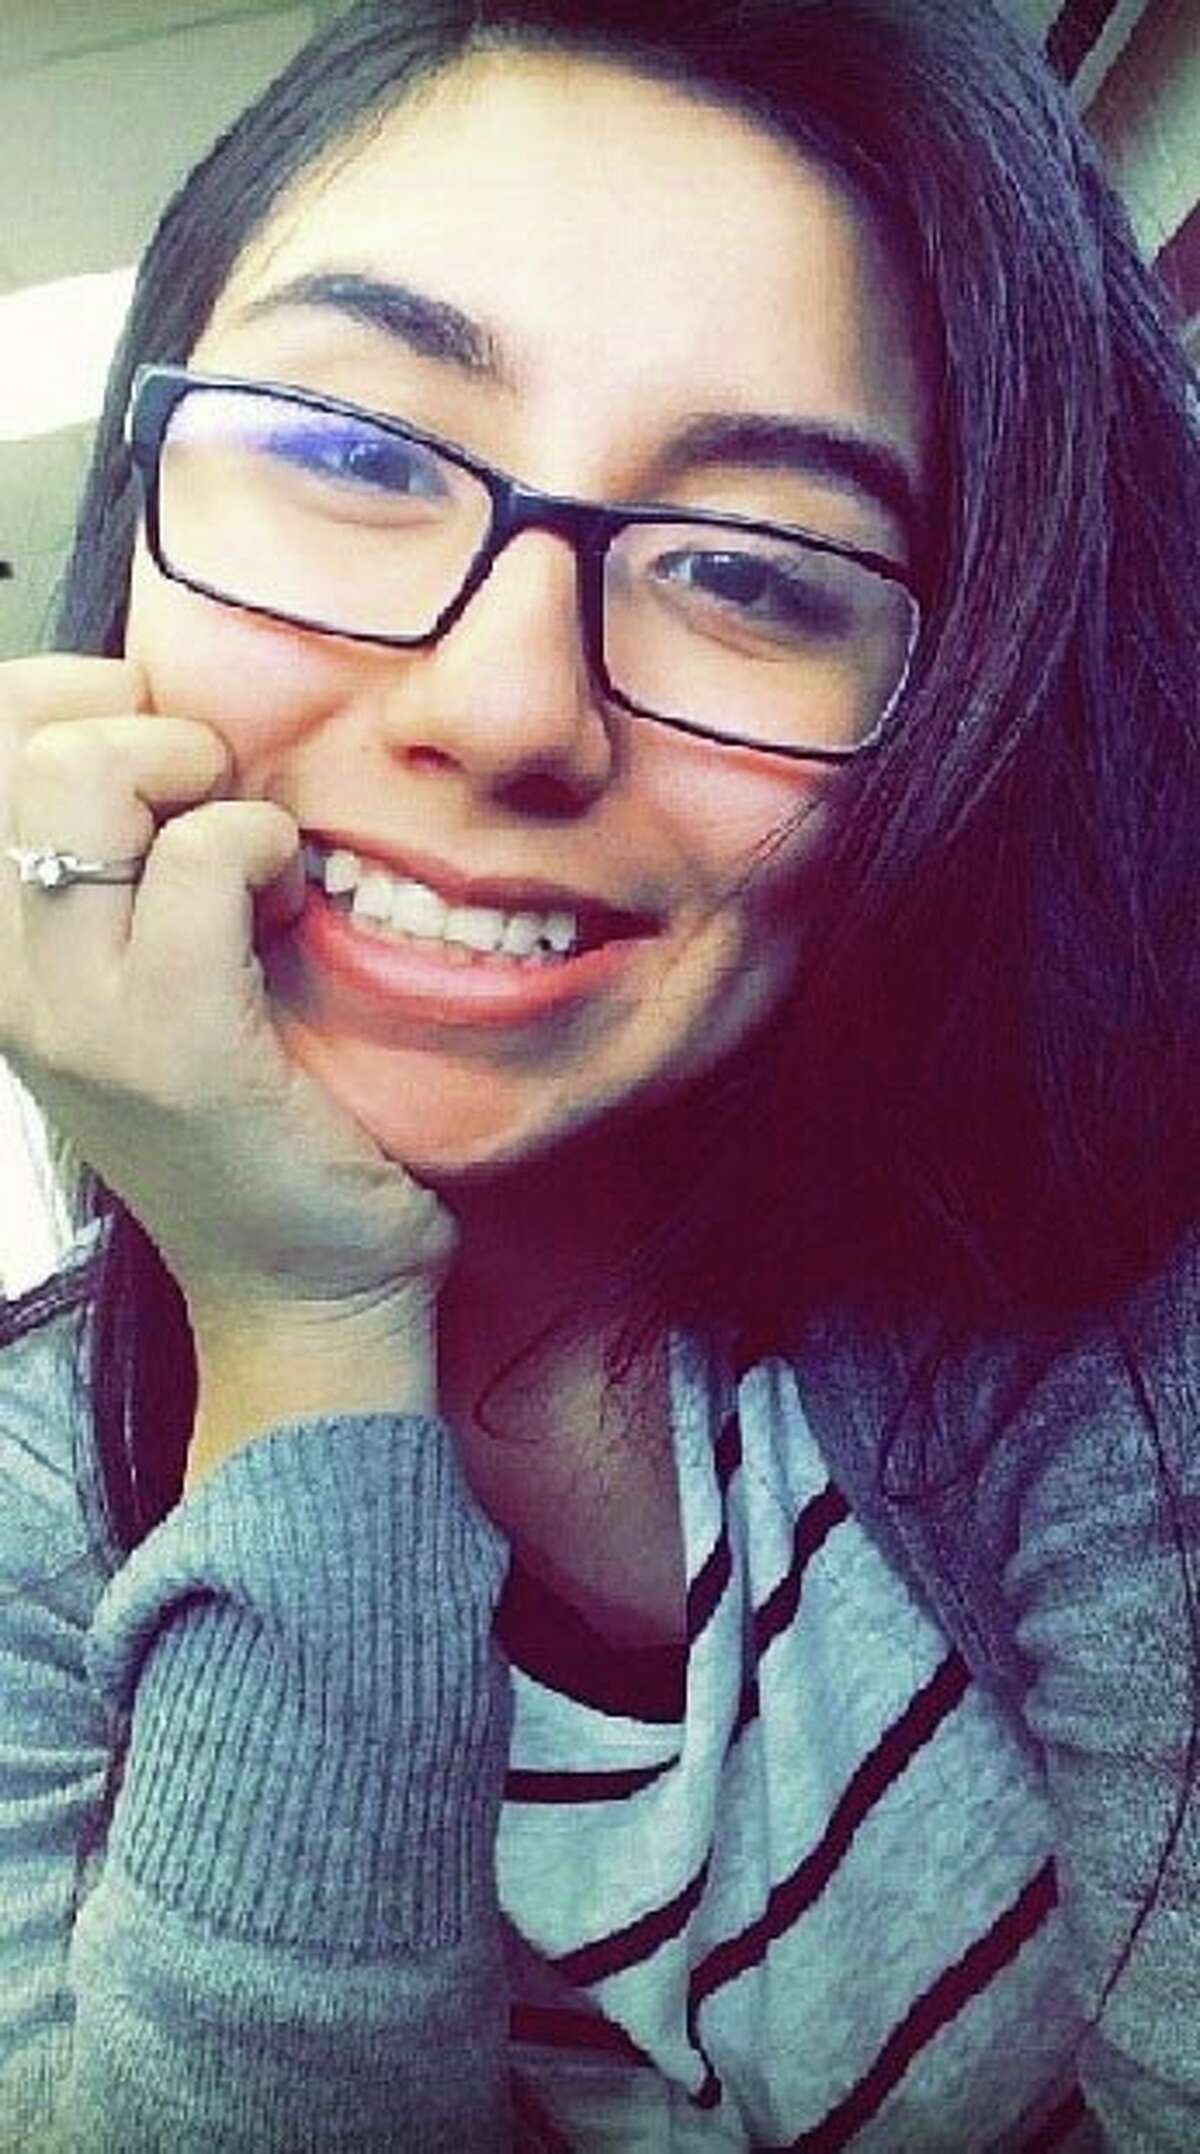 Jacqueline Gomez, 17, MacArthur High School. She was found dead the day after her prom.